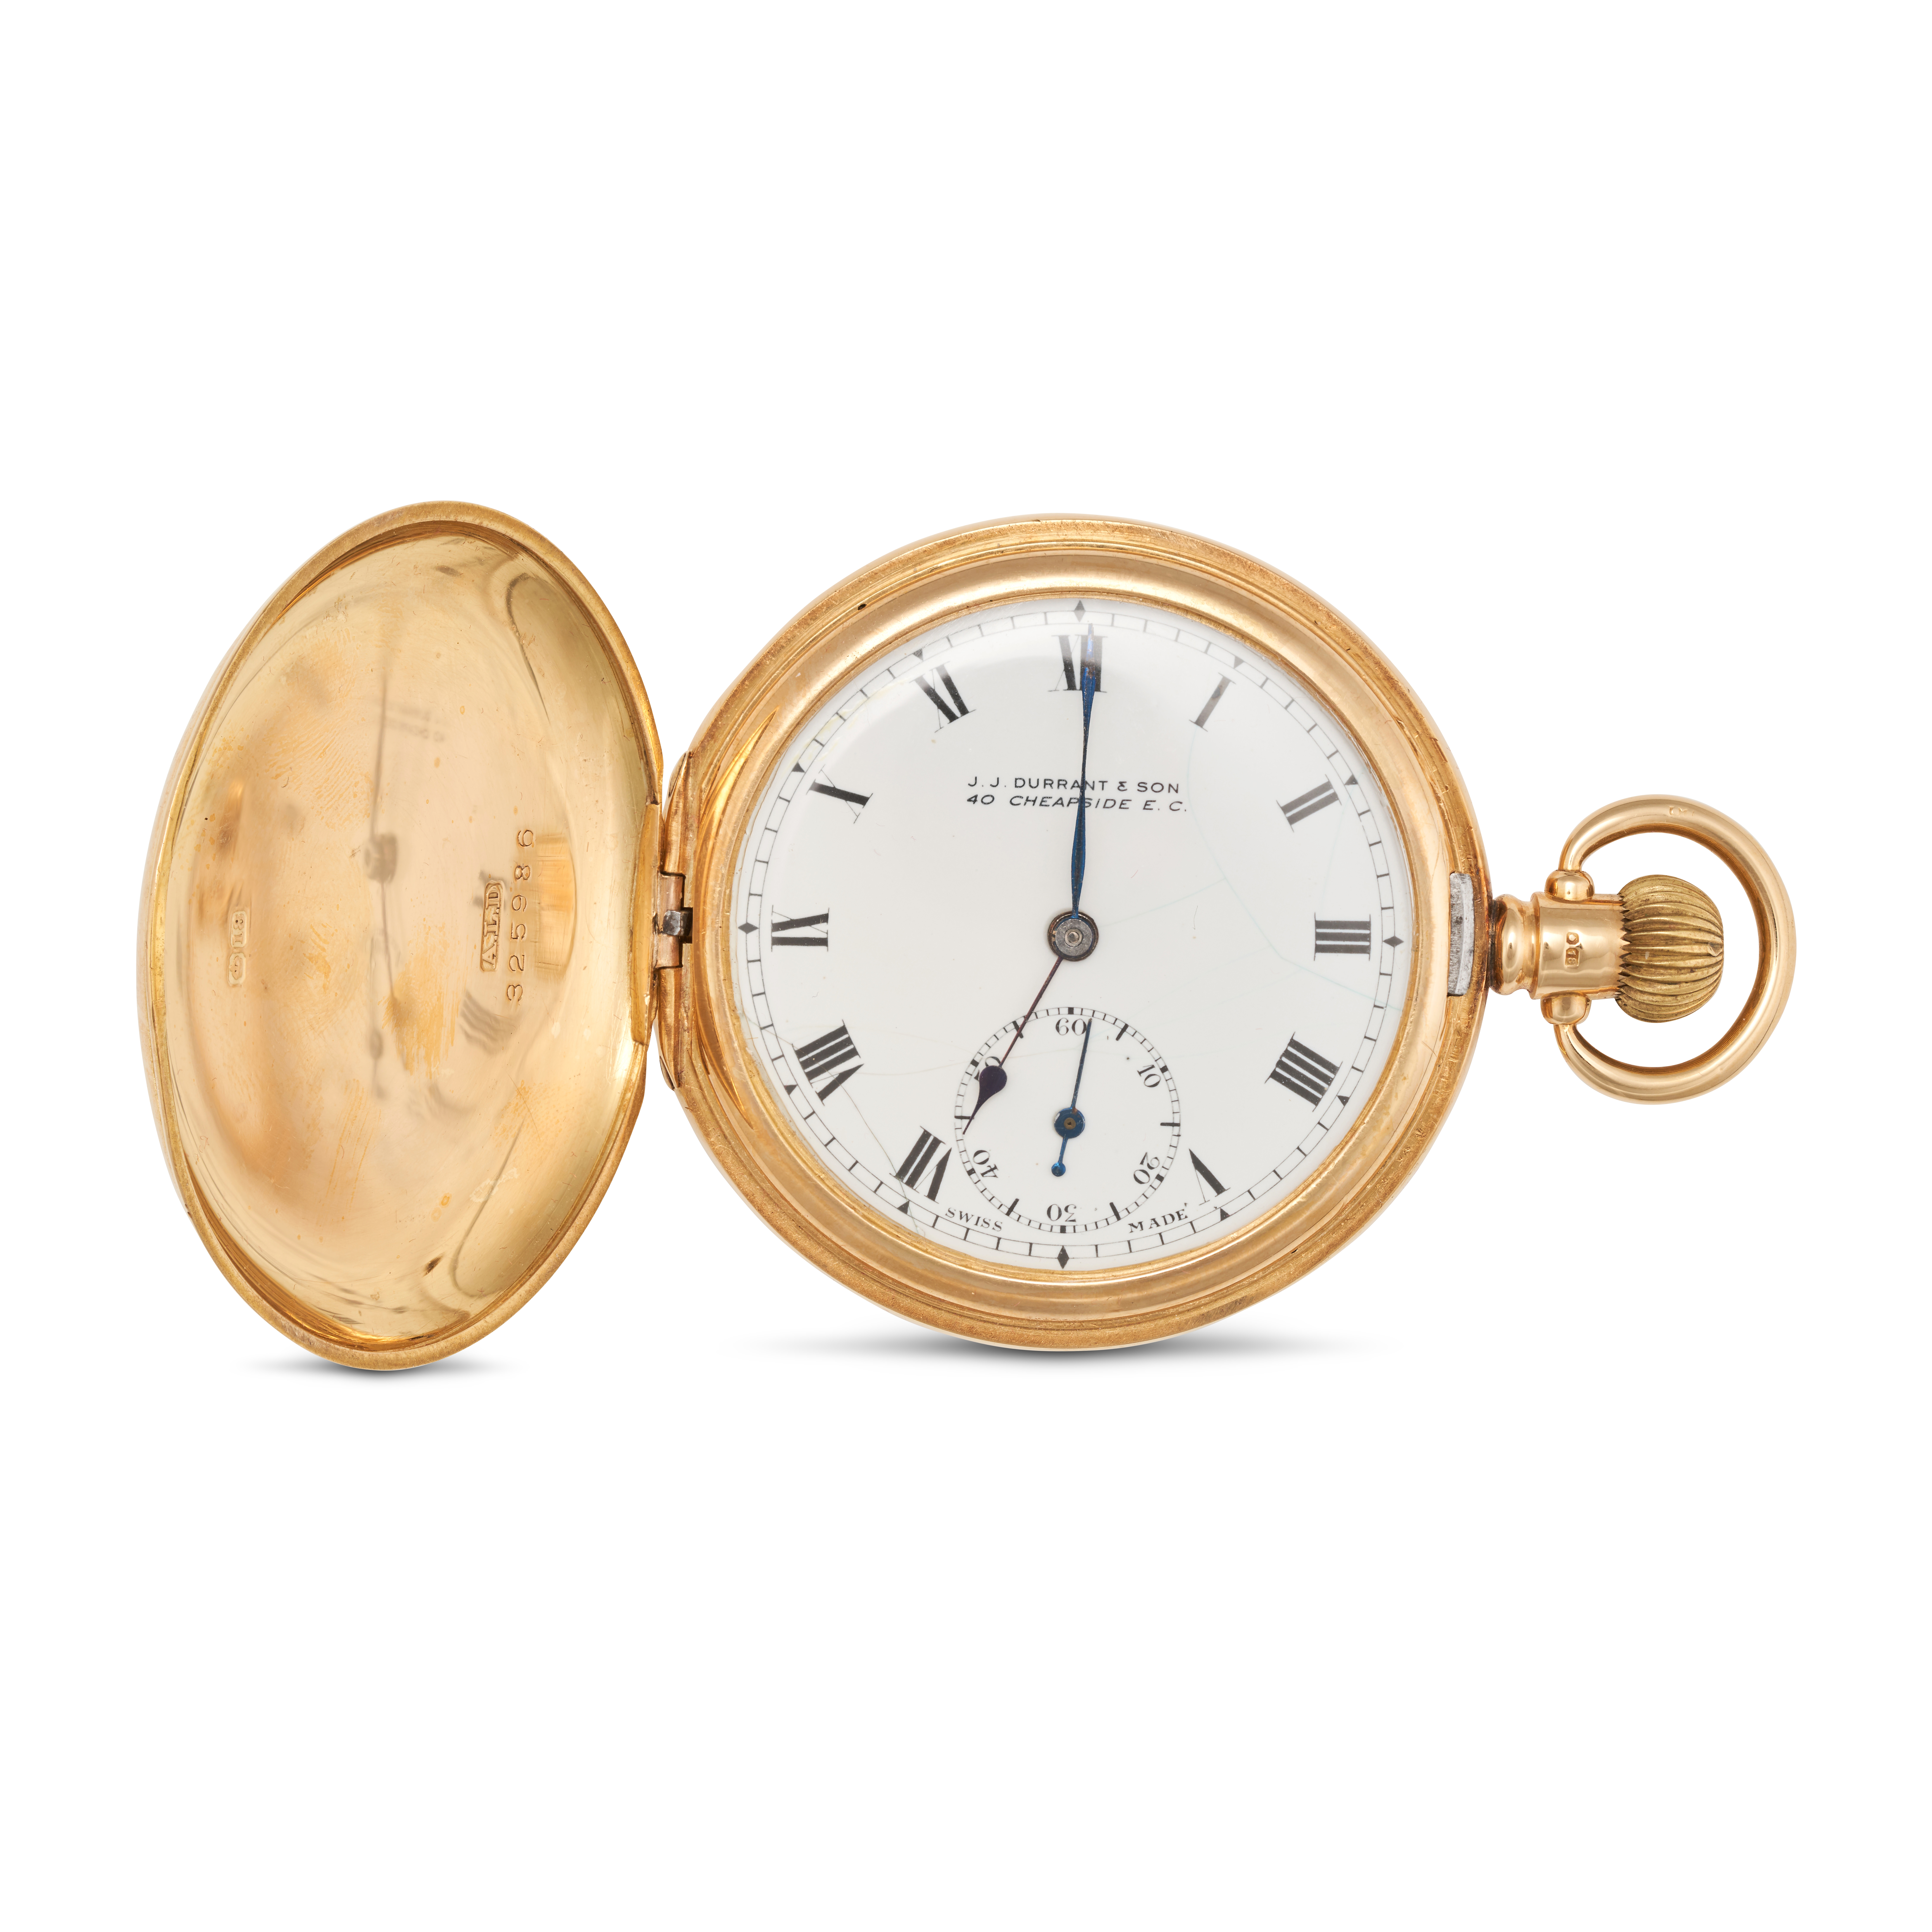 J.J. DURRANT & SON, AN ANTIQUE POCKETWATCH in 18ct yellow gold, enamelled dial with Roman numeral...